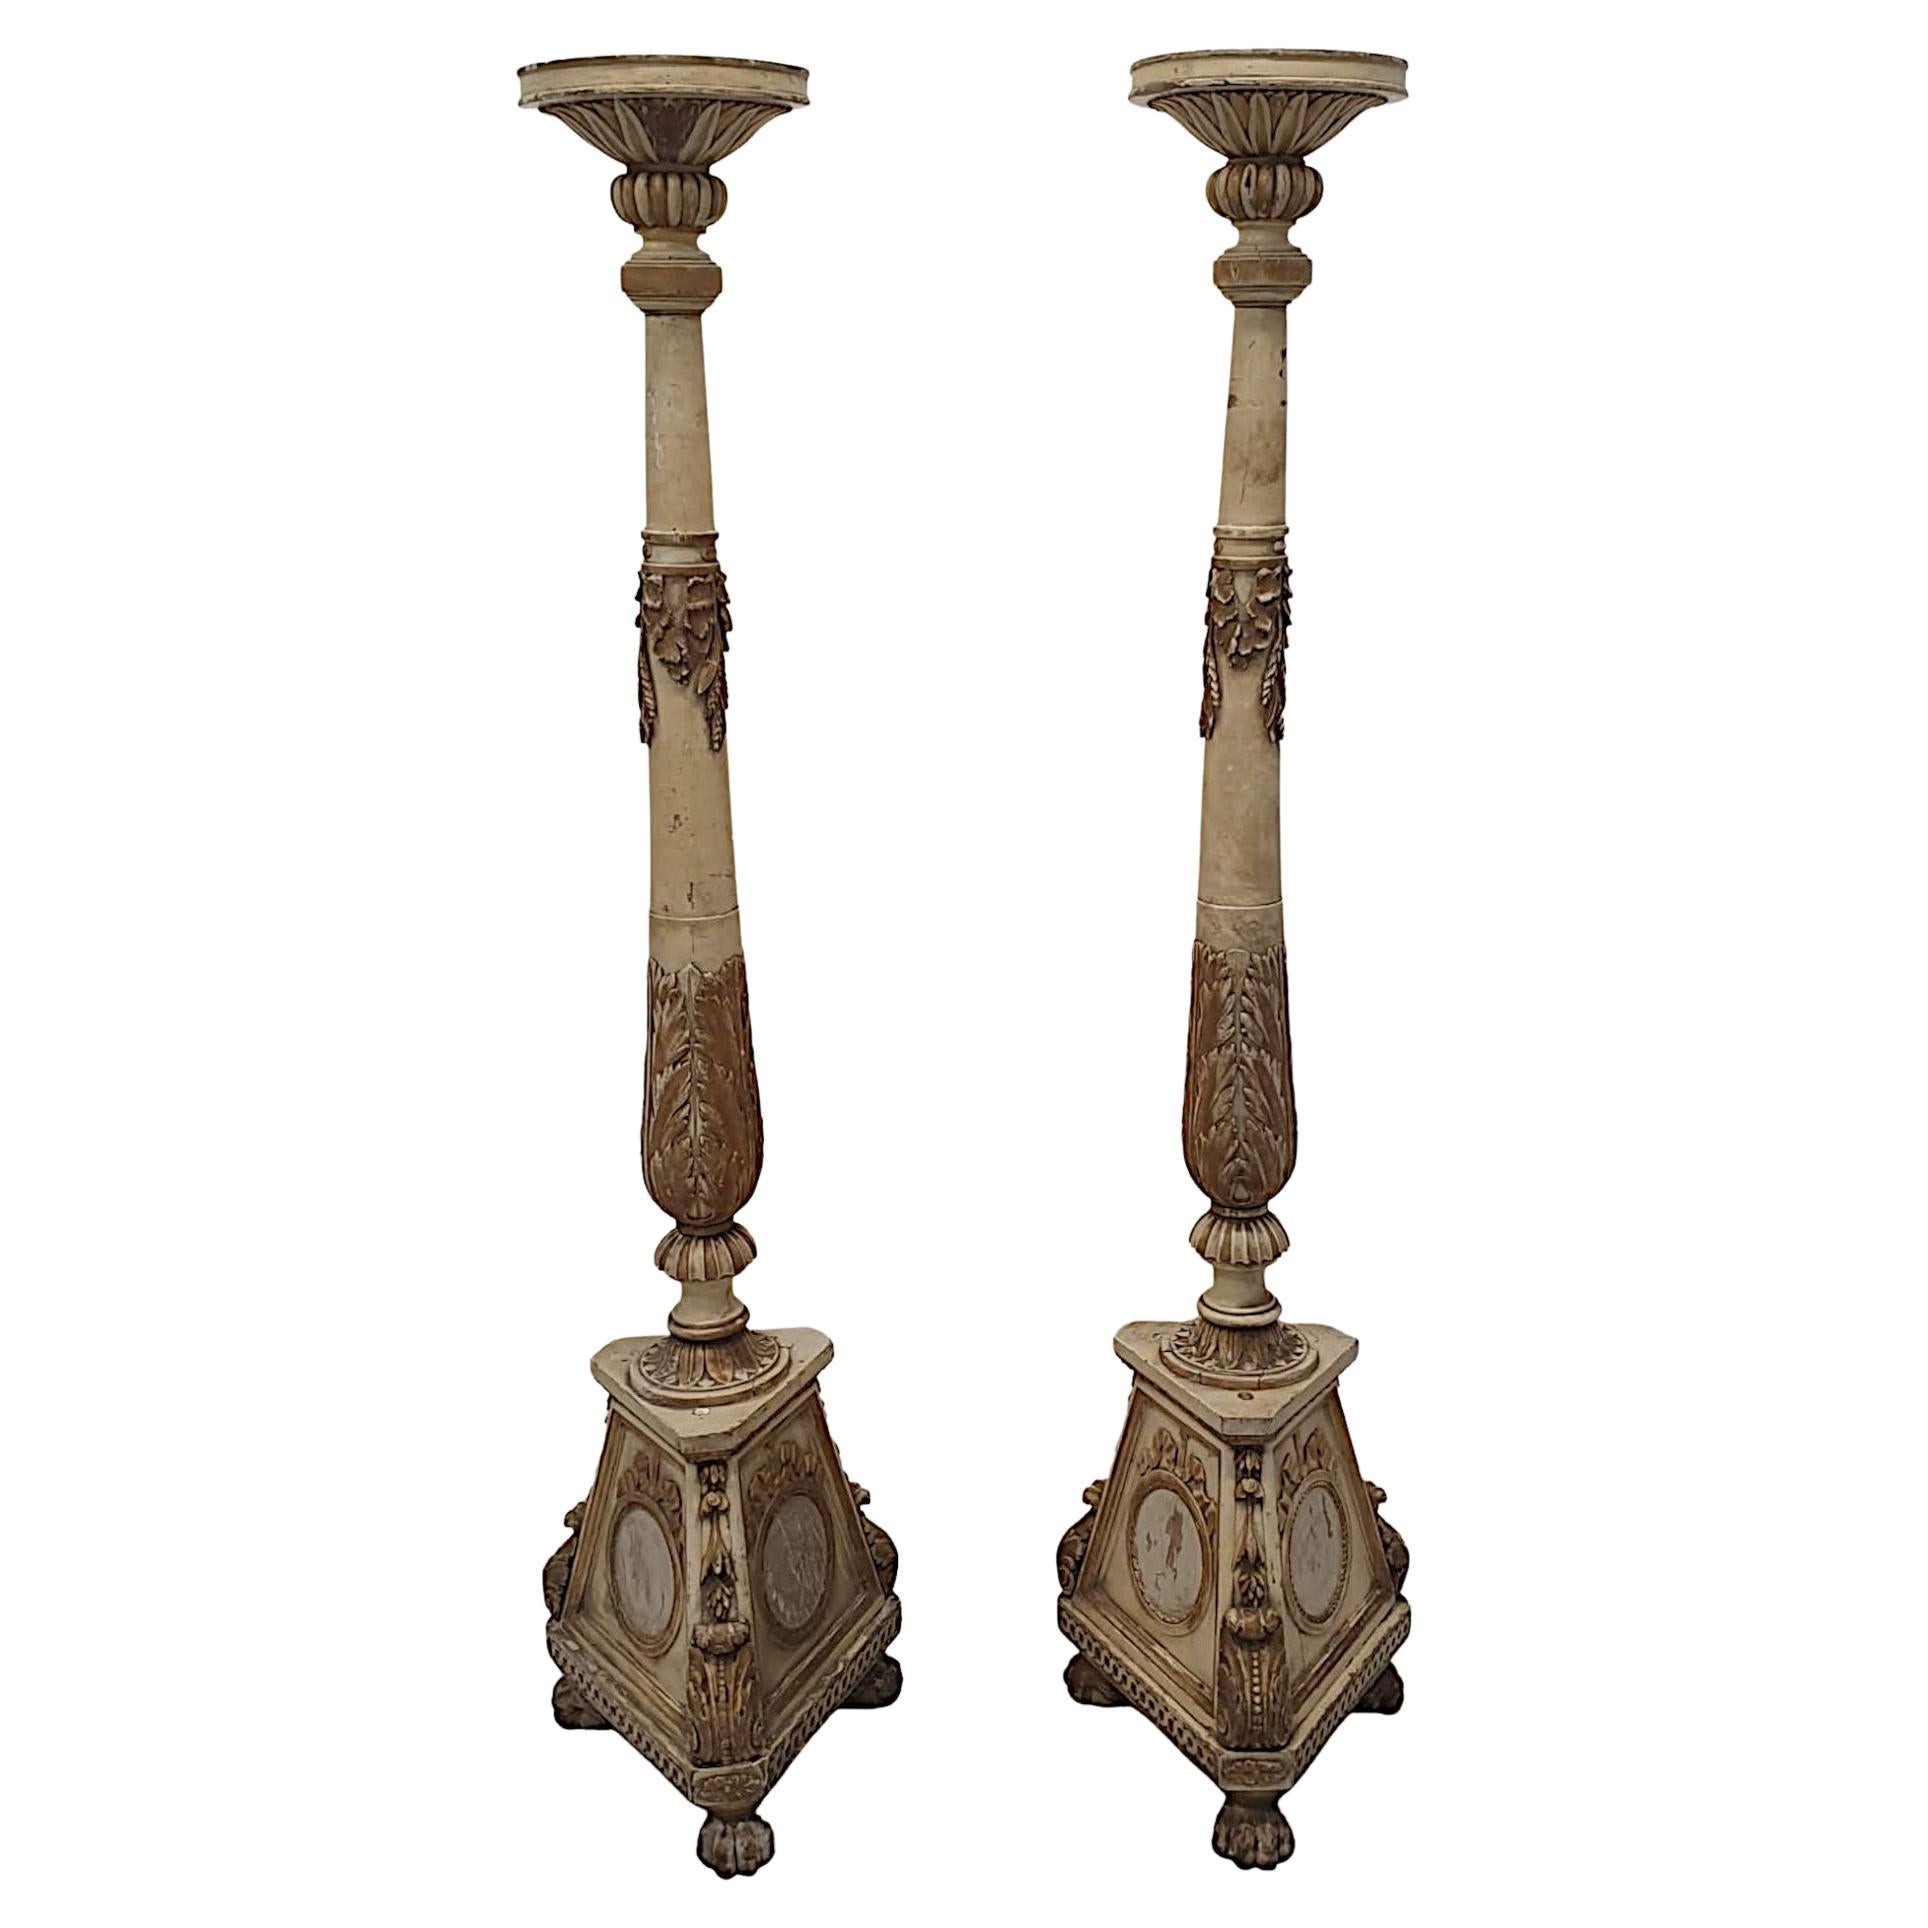 Very Rare and Unusual Pair of 19th Century Parcel Gilt Torcheres For Sale